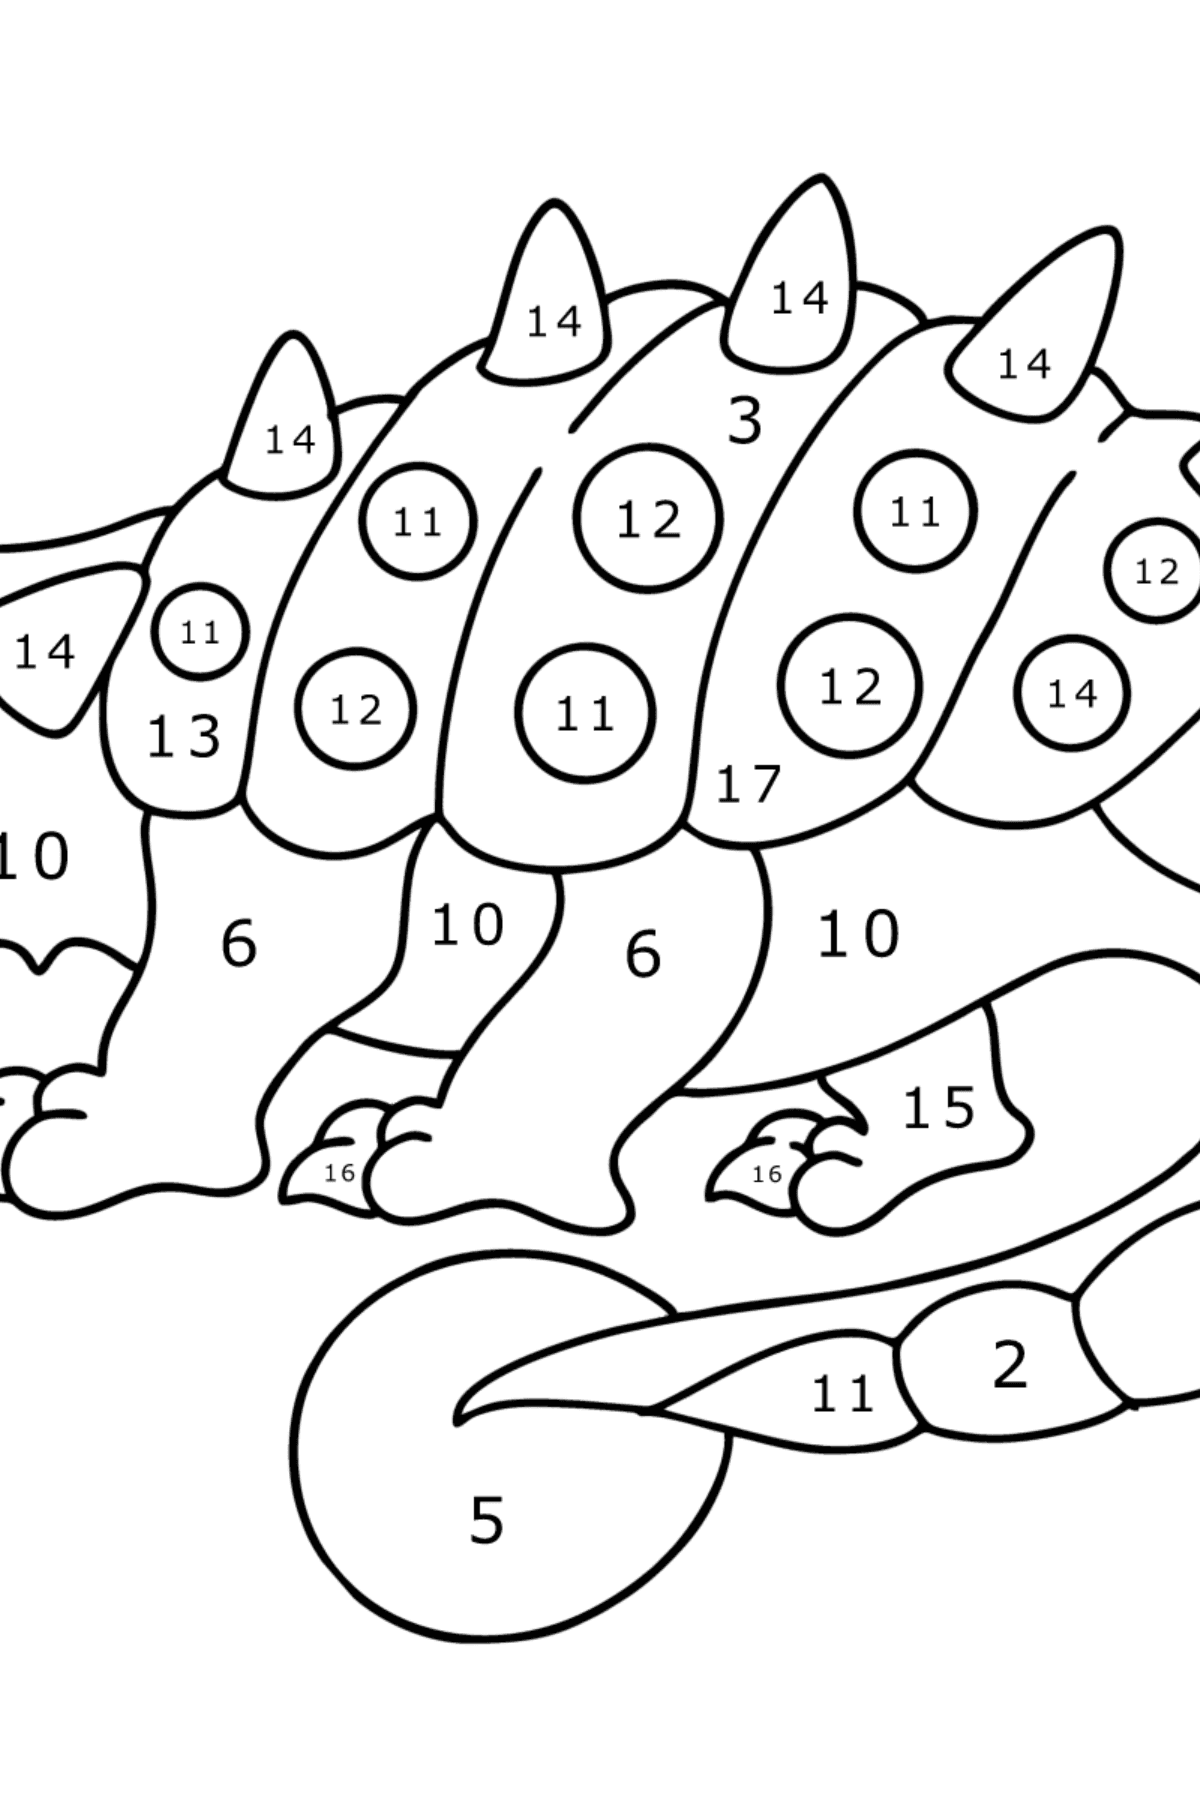 Ankylosaurus coloring page - Coloring by Numbers for Kids